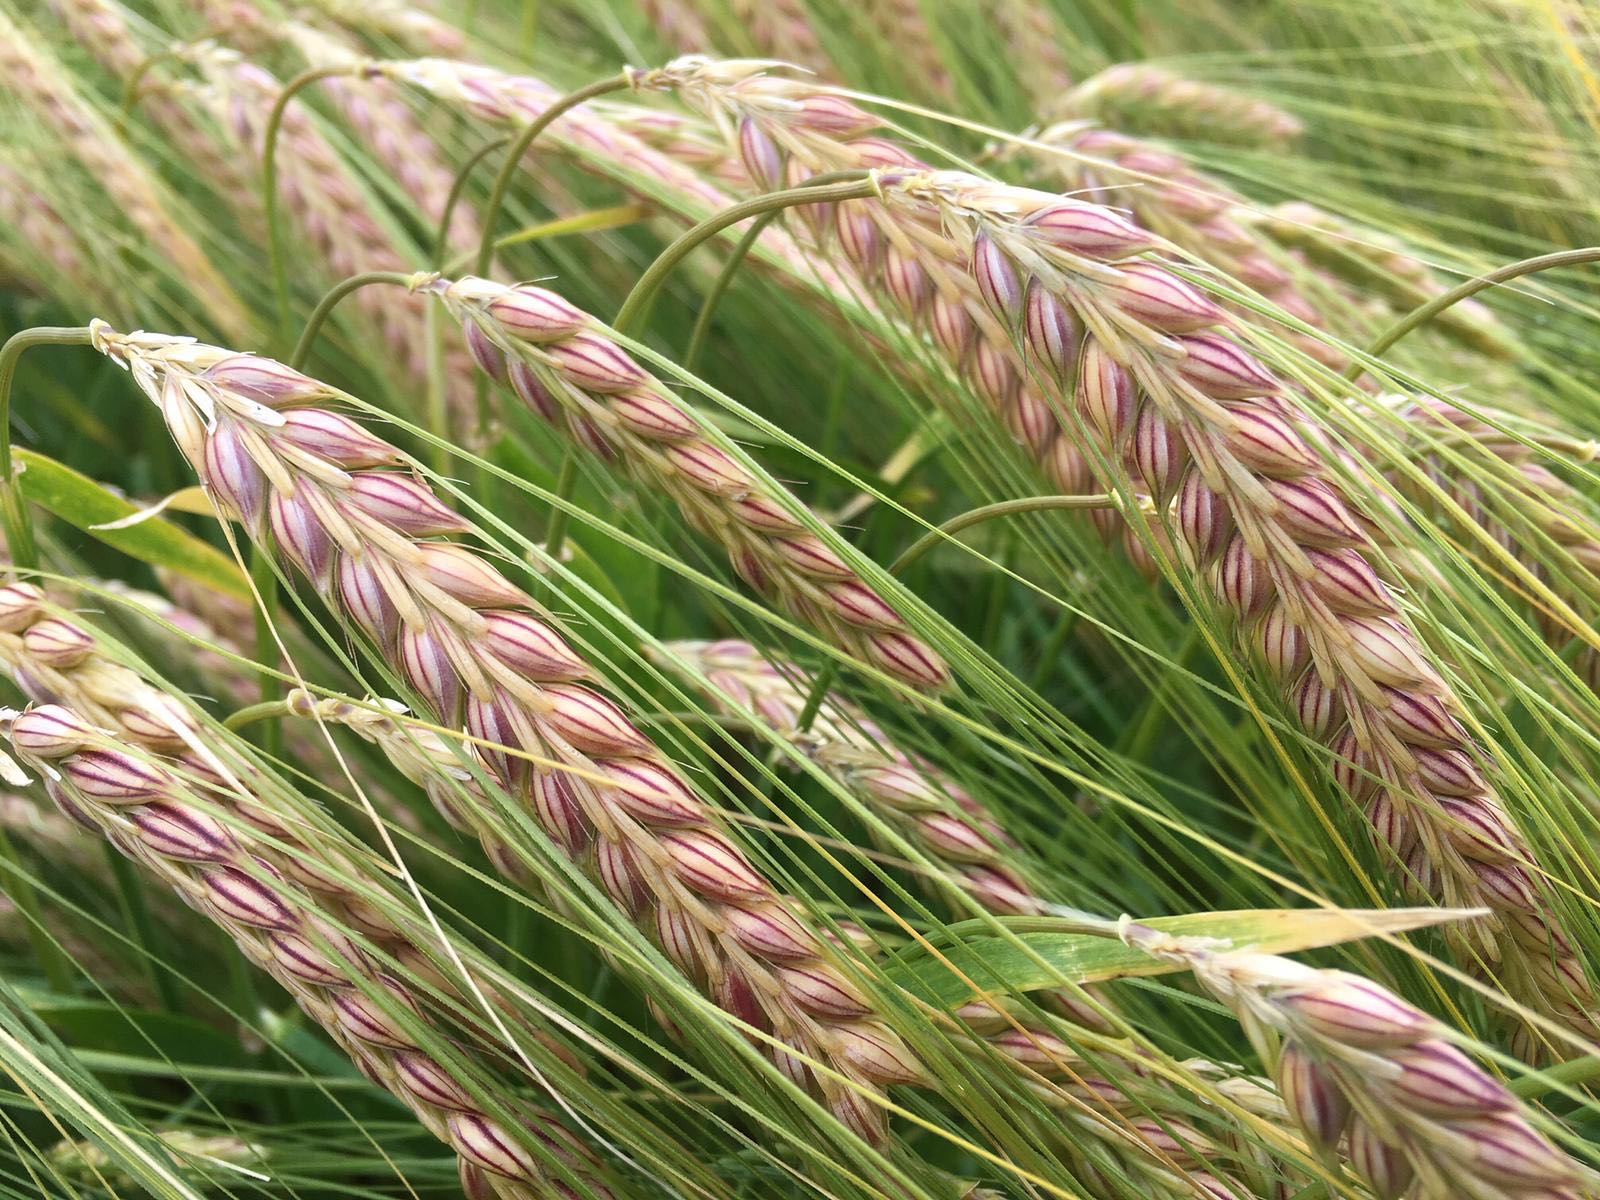 Opportunities increase for winter malting barley - Brownfield Ag News.